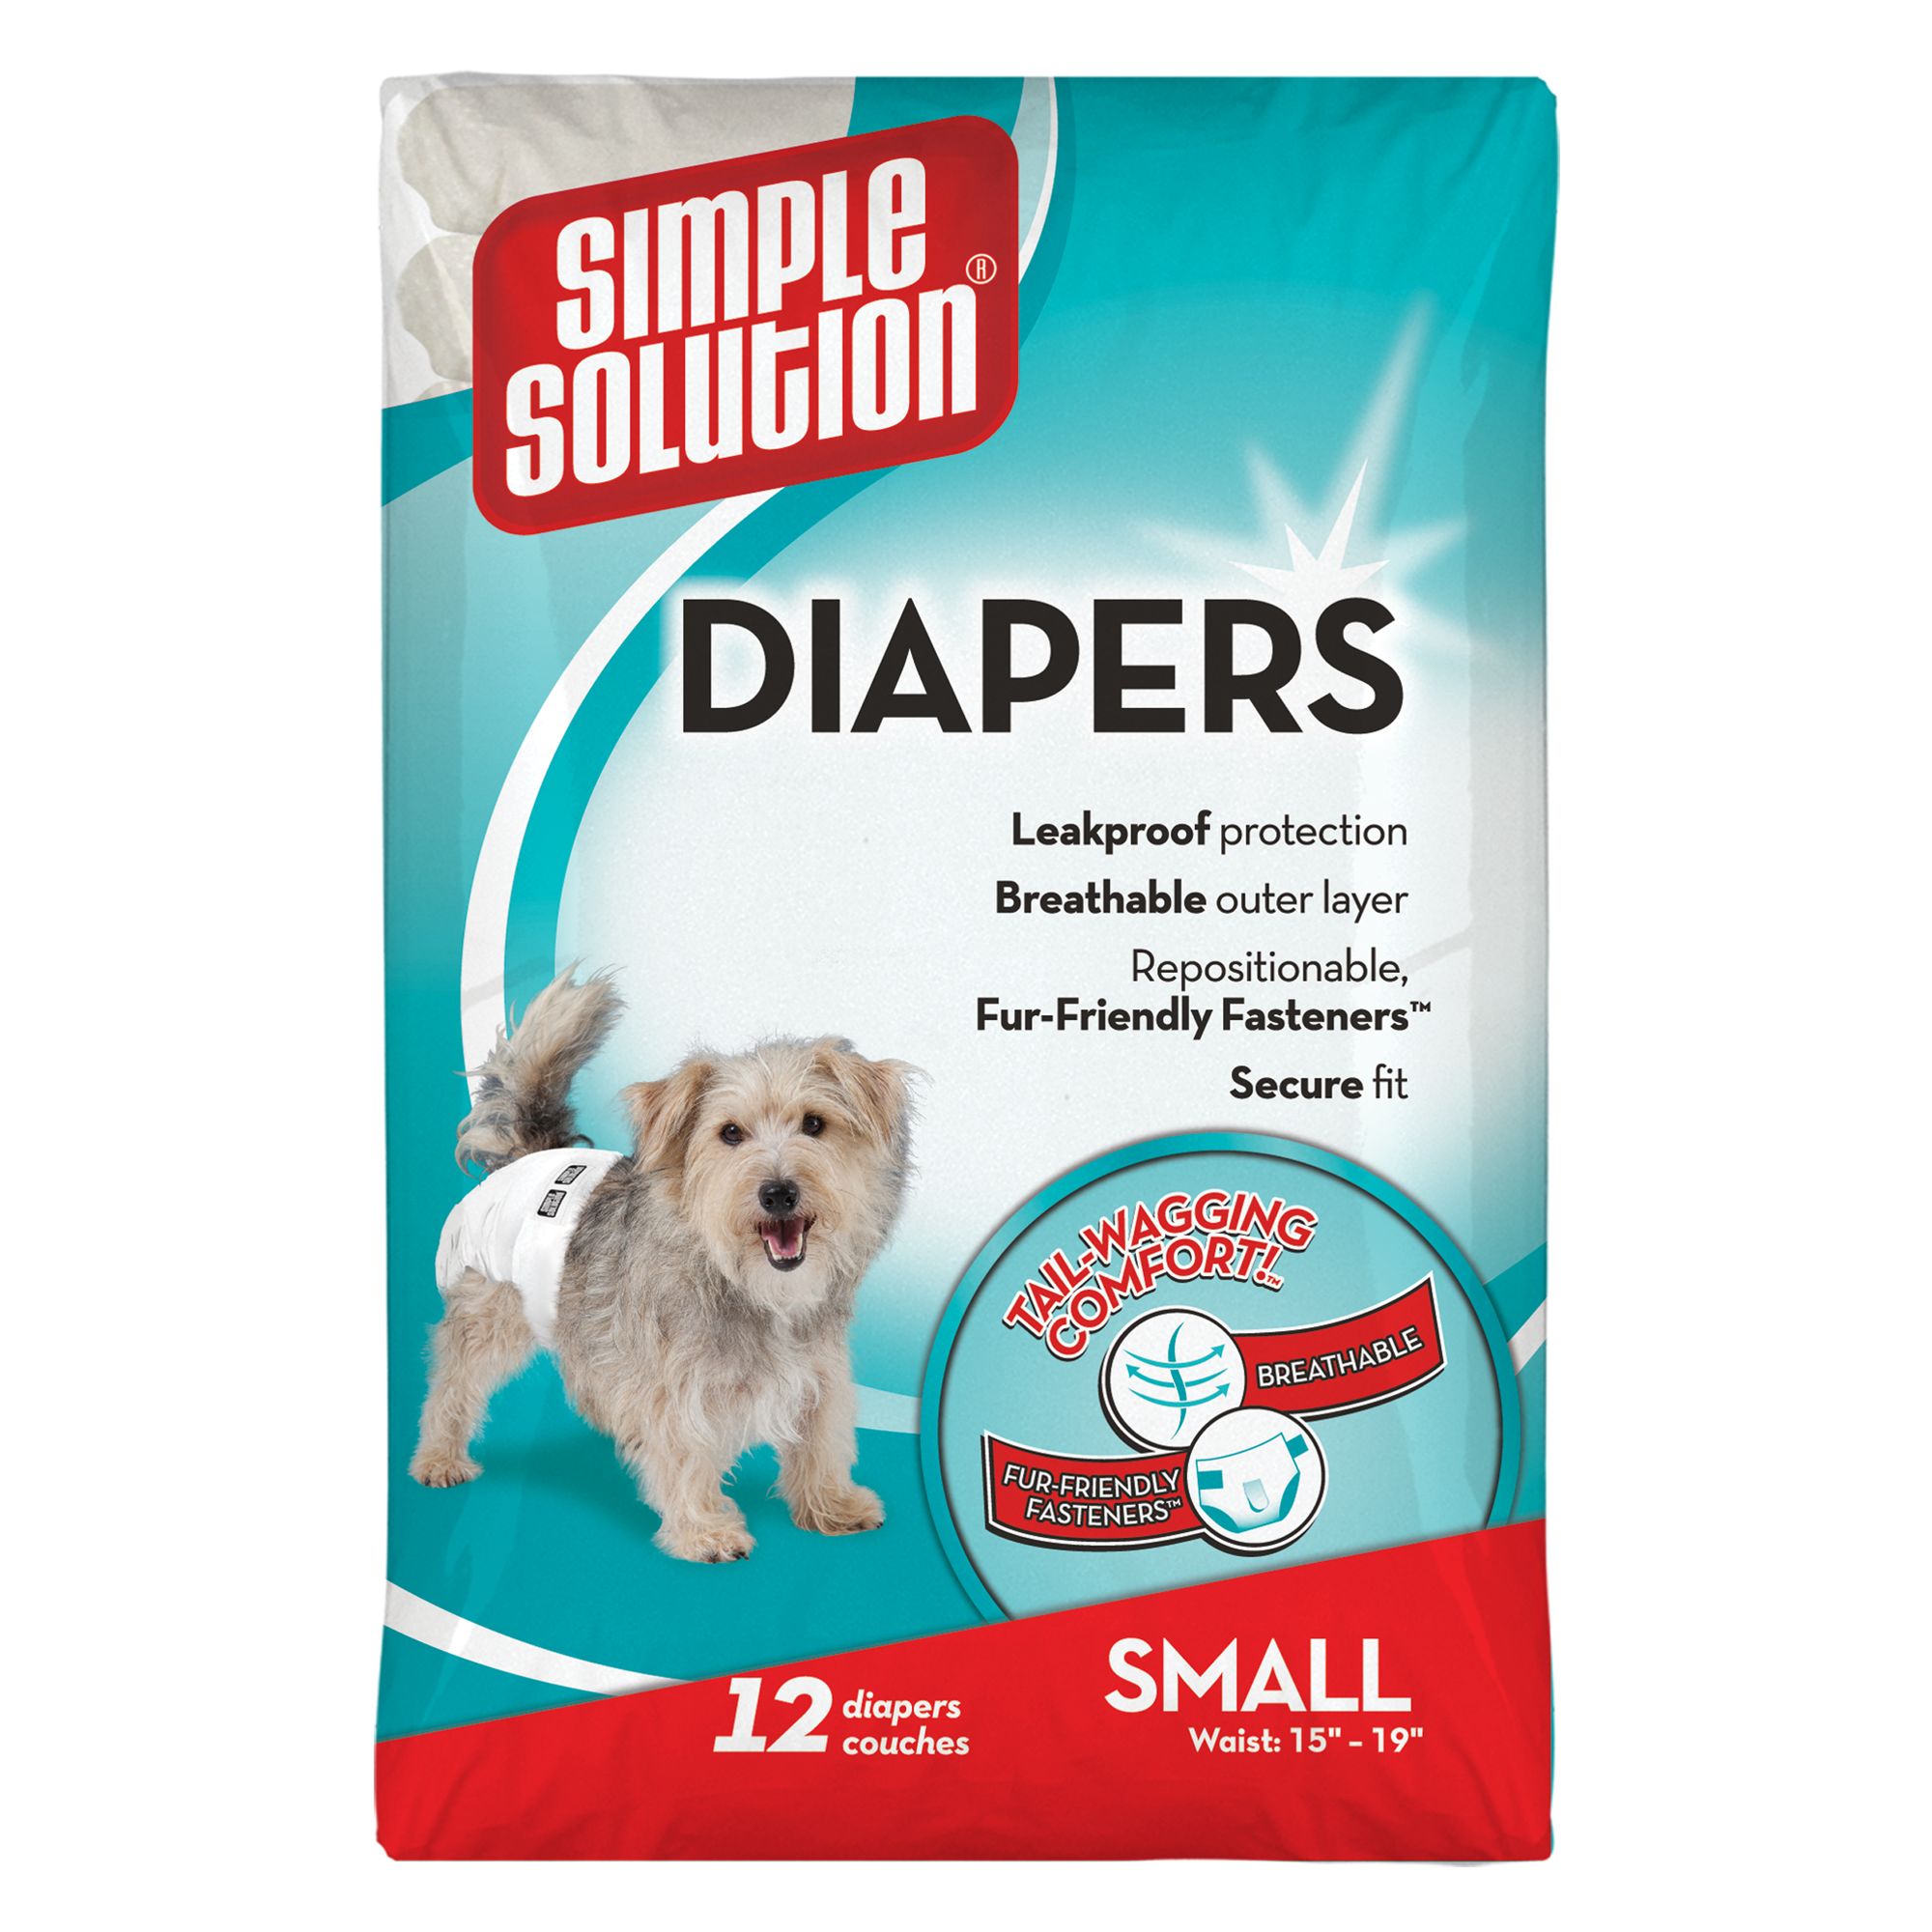 Simple Solution 12 Disposable Diapers Small